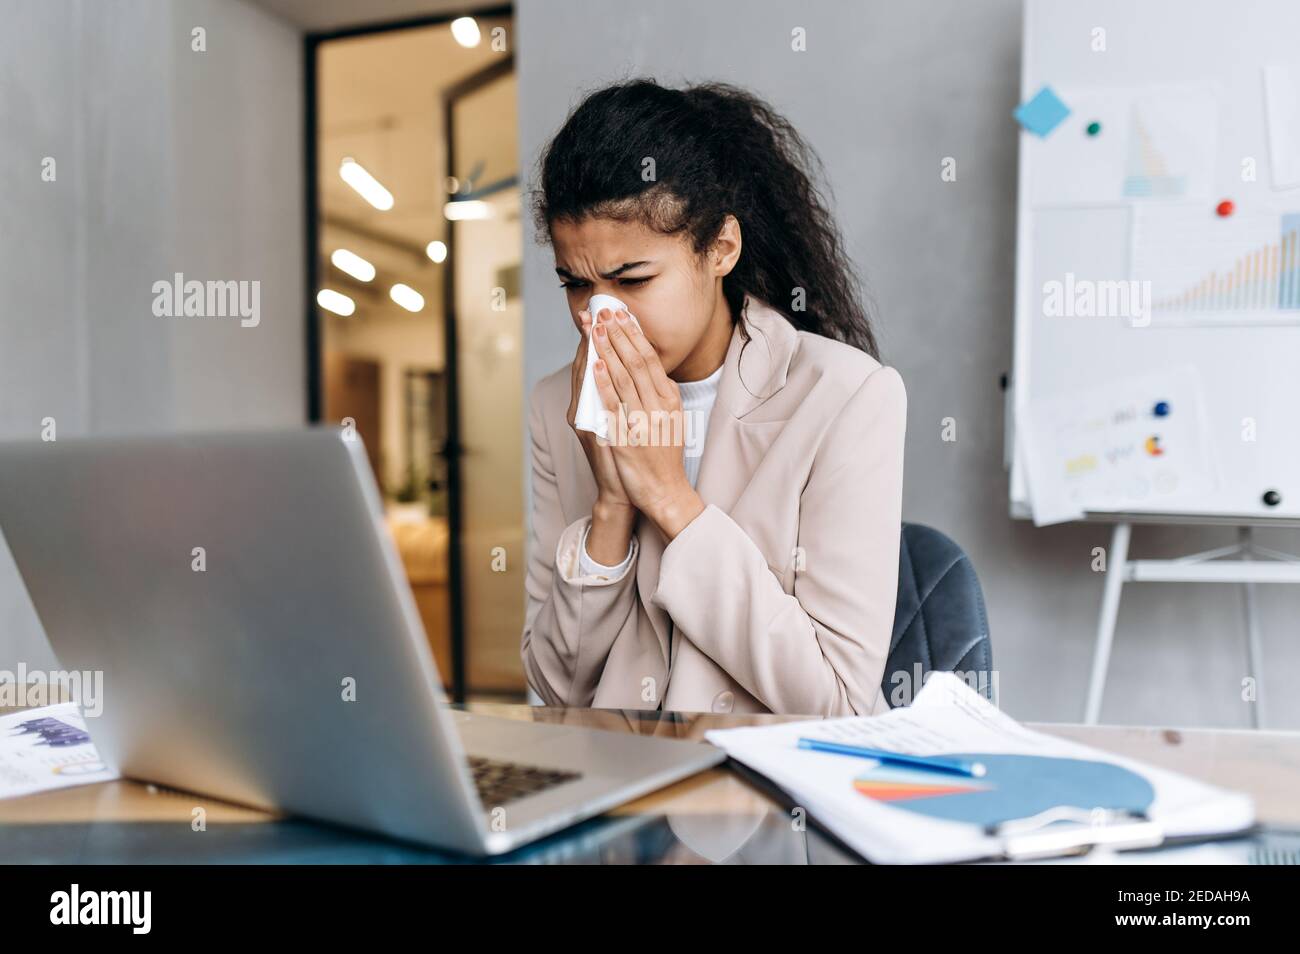 Business woman sit at the desk, using paper tissue, sneezing. Beautiful female employee feeling unwell, sick with running nose. African american lady remotely working or studying, while sickness Stock Photo